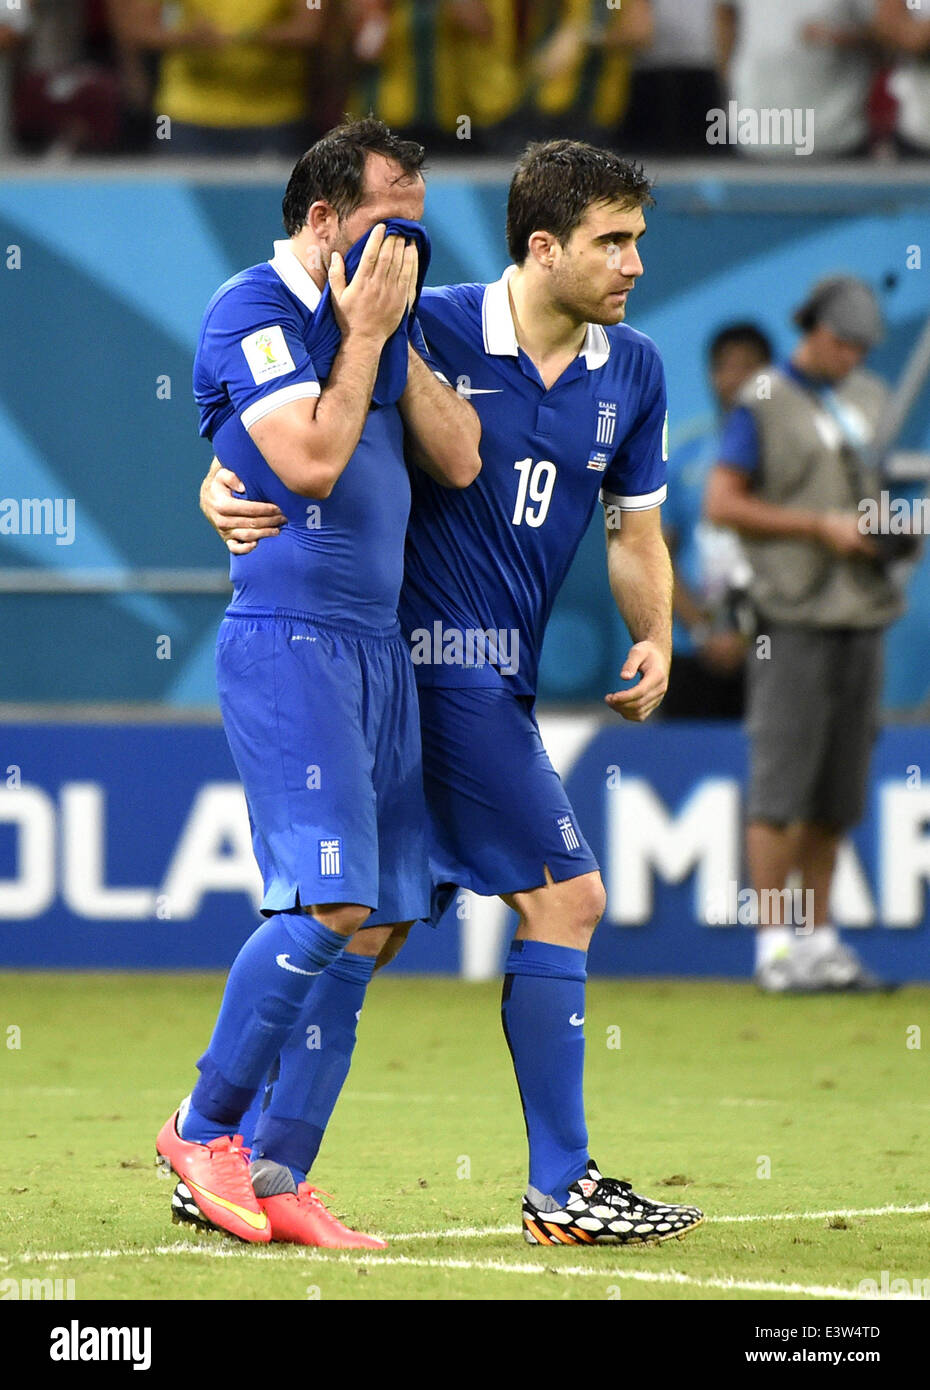 (140629) -- RECIFE, June 29, 2014 (Xinhua) -- Greece's Theofanis Gekas (L) reacts after missing a penalty kick during the penalty shoot-out of a Round of 16 match between Costa Rica and Greece of 2014 FIFA World Cup at the Arena Pernambuco Stadium in Recife, Brazil, on June 29, 2014. Costa Rica won 6-4 (5-3 in penalties) over Greece and qualified for quarter-finals on Sunday. (Xinhua/Lui Siu Wai)(pcy) Stock Photo